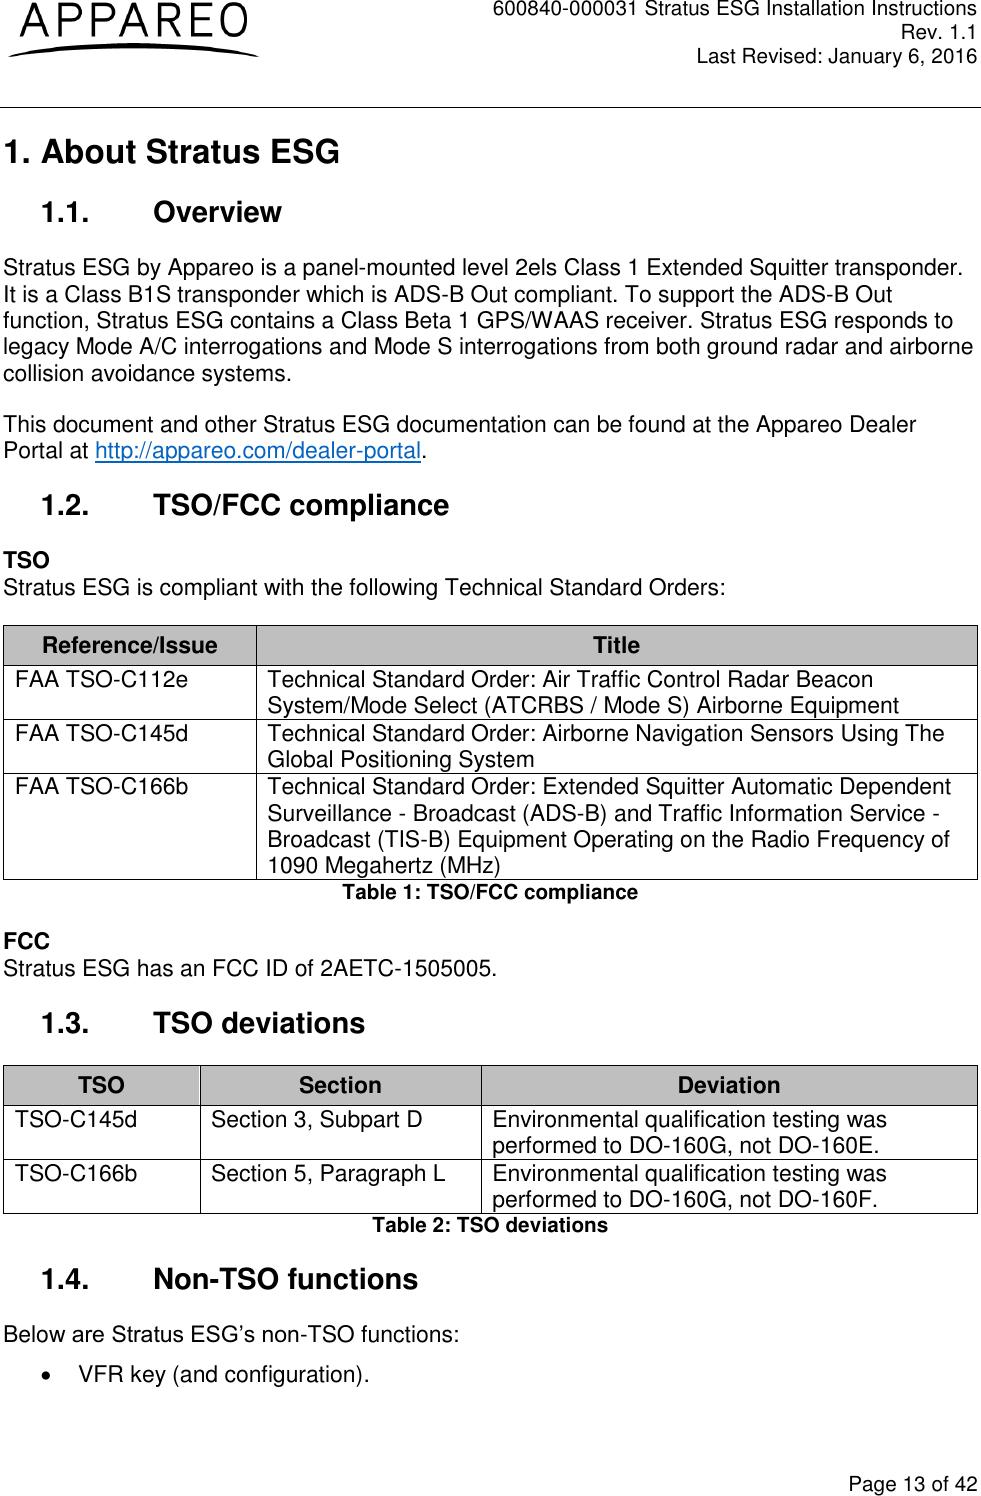 600840-000031 Stratus ESG Installation Instructions Rev. 1.1 Last Revised: January 6, 2016  Page 13 of 42 1. About Stratus ESG 1.1.  Overview Stratus ESG by Appareo is a panel-mounted level 2els Class 1 Extended Squitter transponder. It is a Class B1S transponder which is ADS-B Out compliant. To support the ADS-B Out function, Stratus ESG contains a Class Beta 1 GPS/WAAS receiver. Stratus ESG responds to legacy Mode A/C interrogations and Mode S interrogations from both ground radar and airborne collision avoidance systems. This document and other Stratus ESG documentation can be found at the Appareo Dealer Portal at http://appareo.com/dealer-portal. 1.2.  TSO/FCC compliance TSO Stratus ESG is compliant with the following Technical Standard Orders: Reference/Issue Title FAA TSO-C112e Technical Standard Order: Air Traffic Control Radar Beacon System/Mode Select (ATCRBS / Mode S) Airborne Equipment FAA TSO-C145d Technical Standard Order: Airborne Navigation Sensors Using The Global Positioning System  FAA TSO-C166b Technical Standard Order: Extended Squitter Automatic Dependent Surveillance - Broadcast (ADS-B) and Traffic Information Service - Broadcast (TIS-B) Equipment Operating on the Radio Frequency of 1090 Megahertz (MHz) Table 1: TSO/FCC compliance FCC Stratus ESG has an FCC ID of 2AETC-1505005. 1.3.  TSO deviations TSO Section Deviation TSO-C145d Section 3, Subpart D Environmental qualification testing was performed to DO-160G, not DO-160E. TSO-C166b Section 5, Paragraph L Environmental qualification testing was performed to DO-160G, not DO-160F. Table 2: TSO deviations 1.4.  Non-TSO functions Below are Stratus ESG’s non-TSO functions:   VFR key (and configuration). 